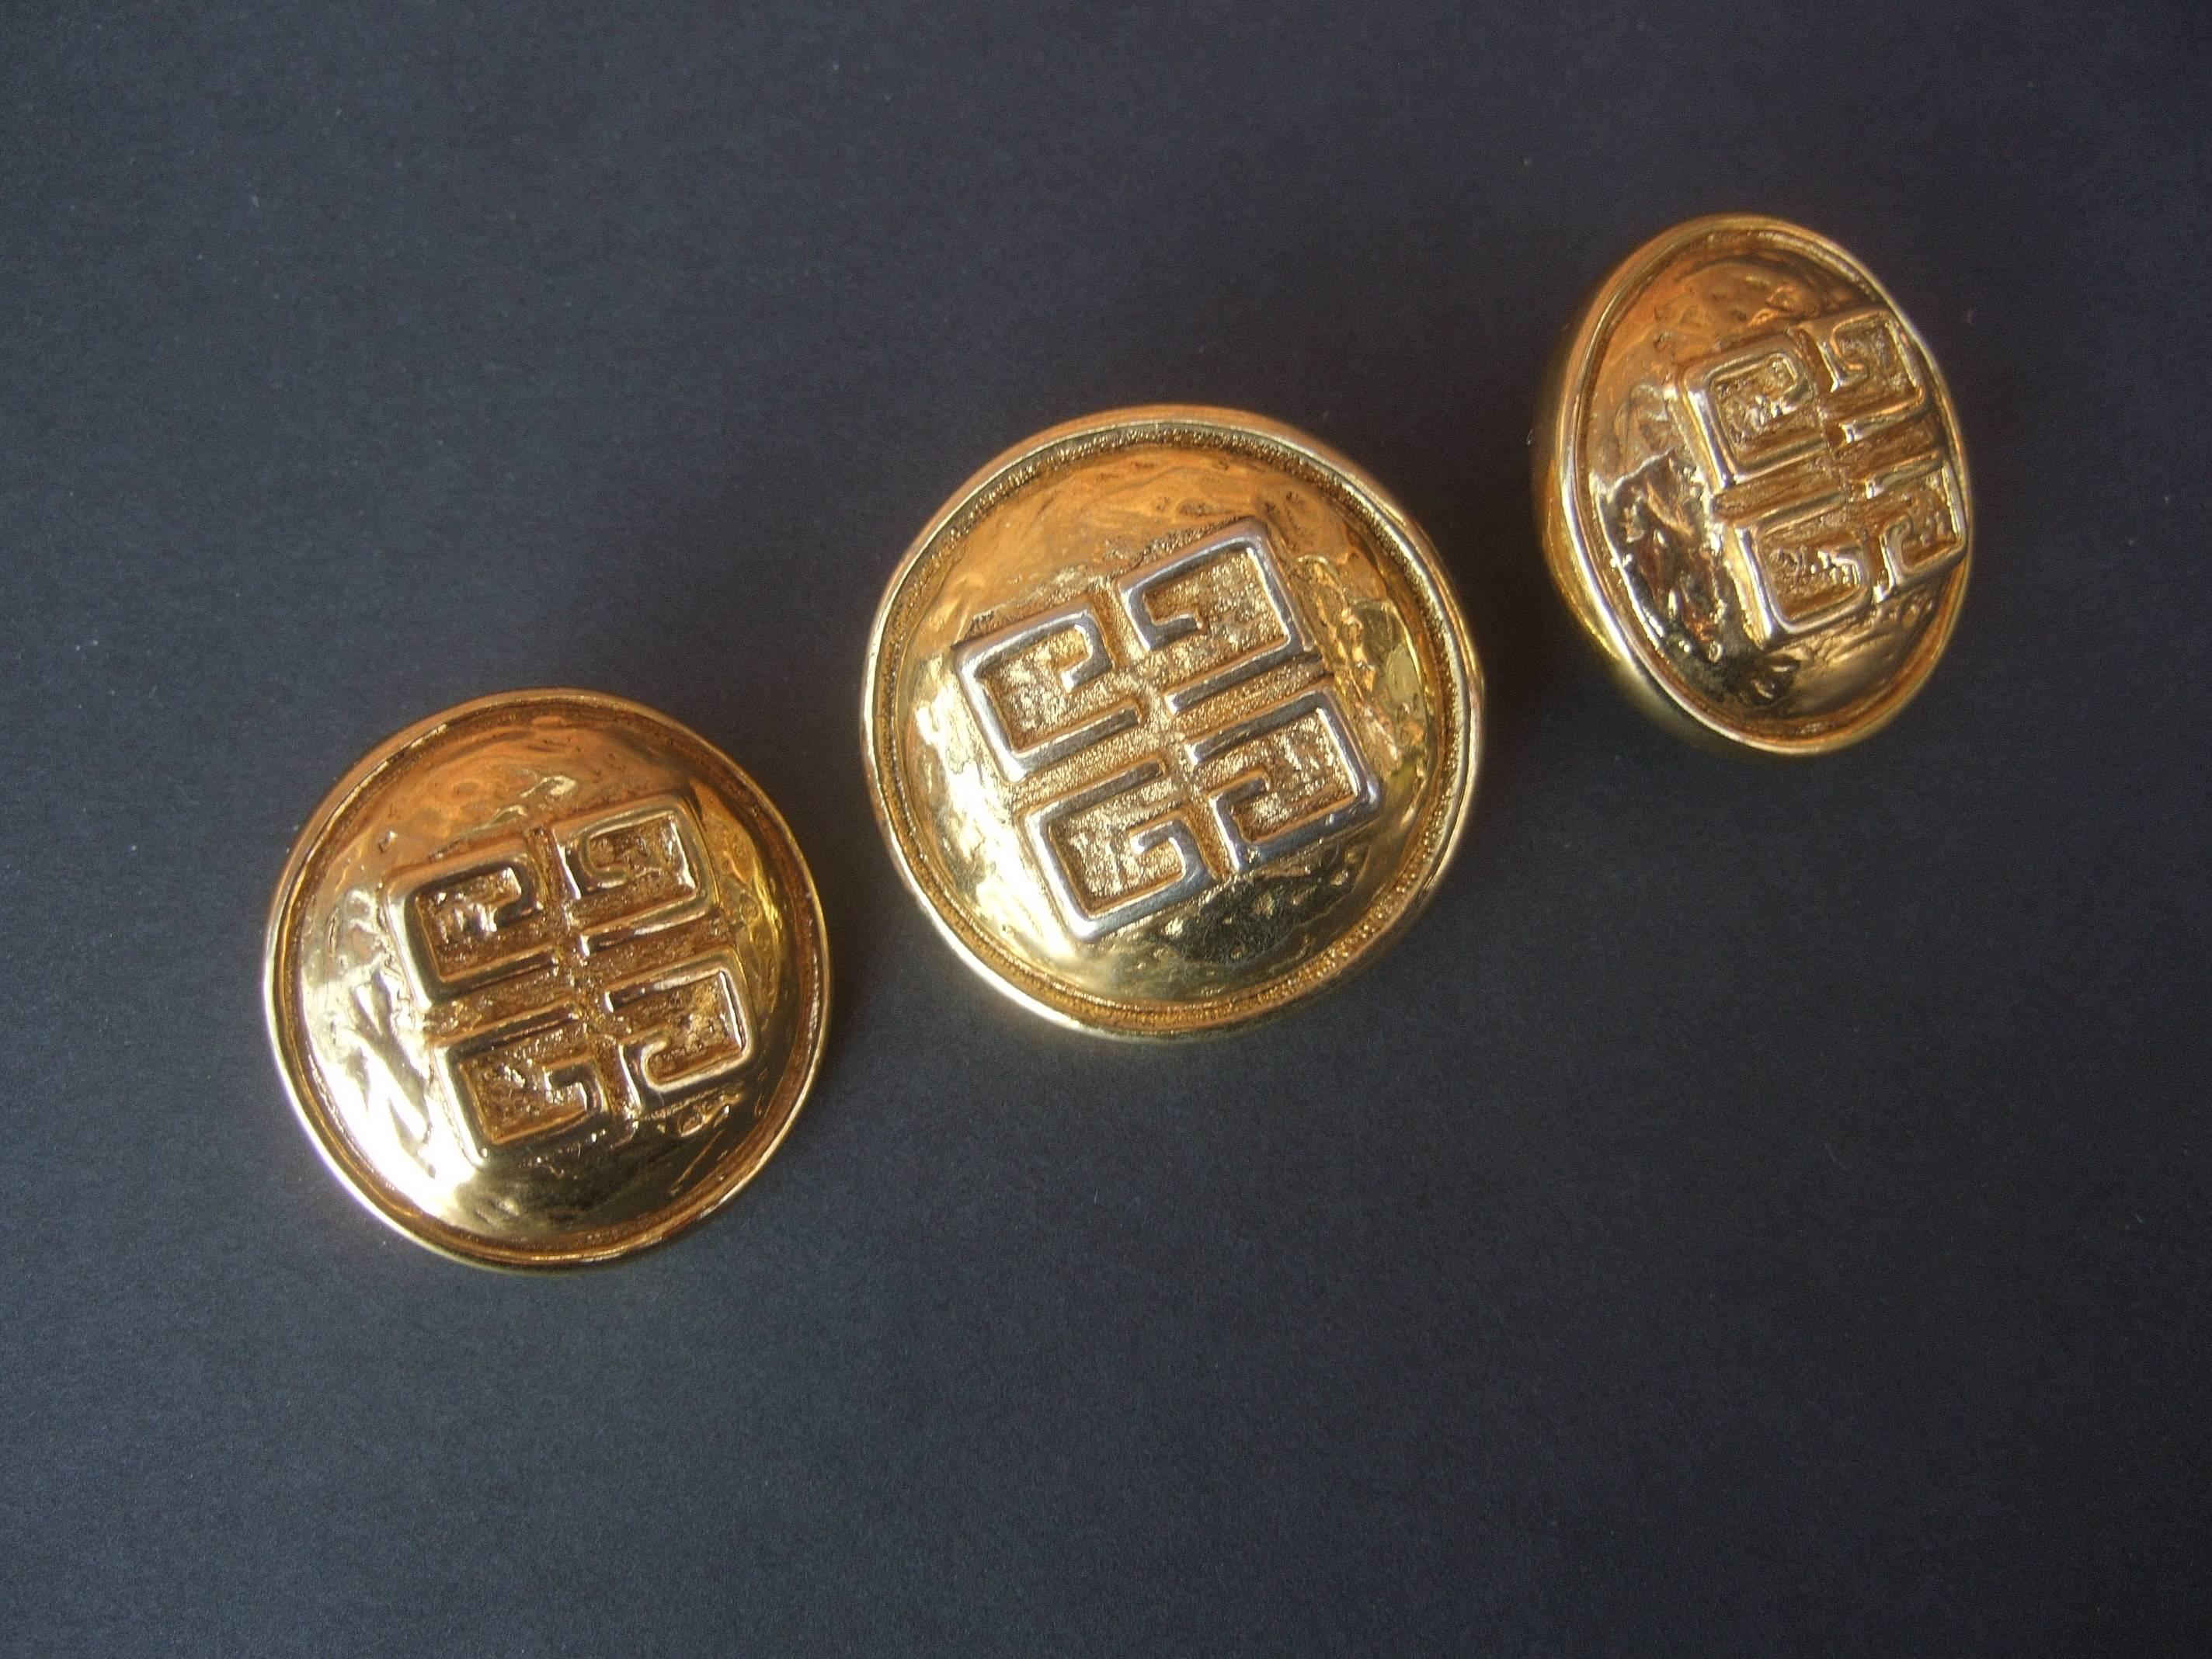 Givenchy France Gilt metal brooch & earrings ca 1980s
The elegant brooch & earrings are adorned with 
Givenchy's signature gilt metal G.G. initials 

The circular base has a hammered textured finish 
in contrast to Givenchy's smooth shiny gold
metal